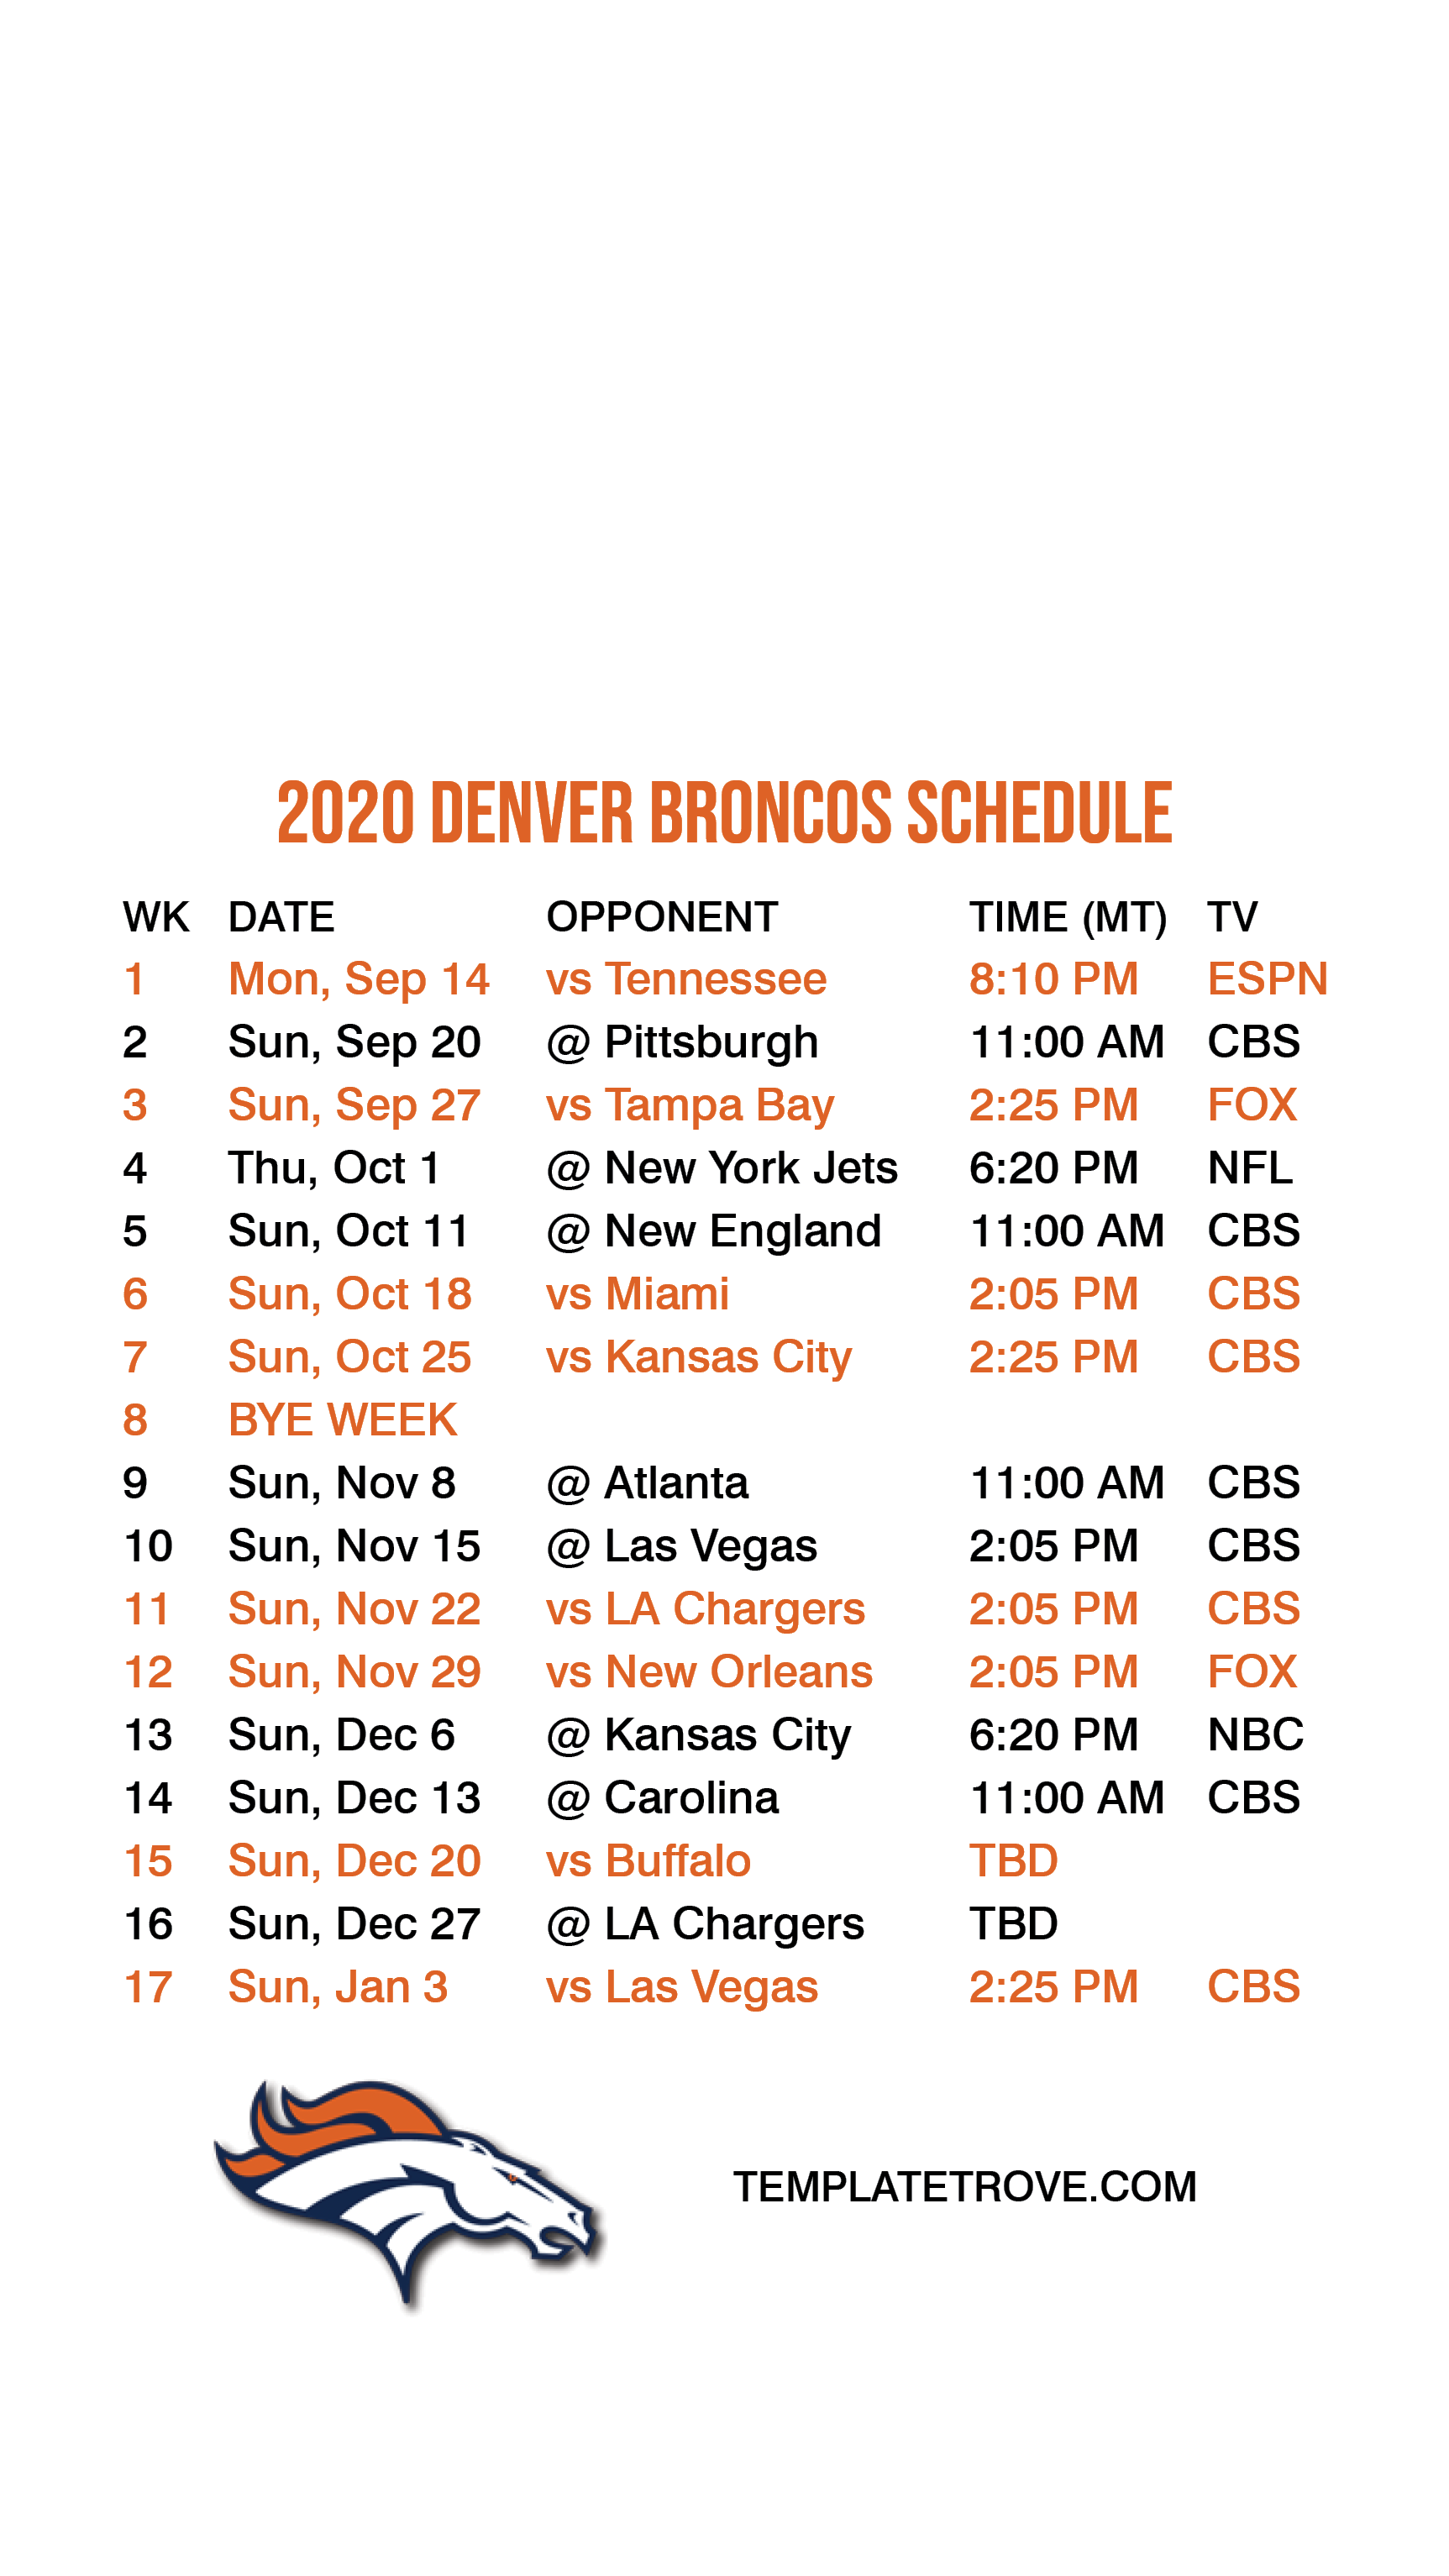 Pin by Bde on Broncos schedule  Broncos schedule, Denver broncos schedule, Denver  broncos